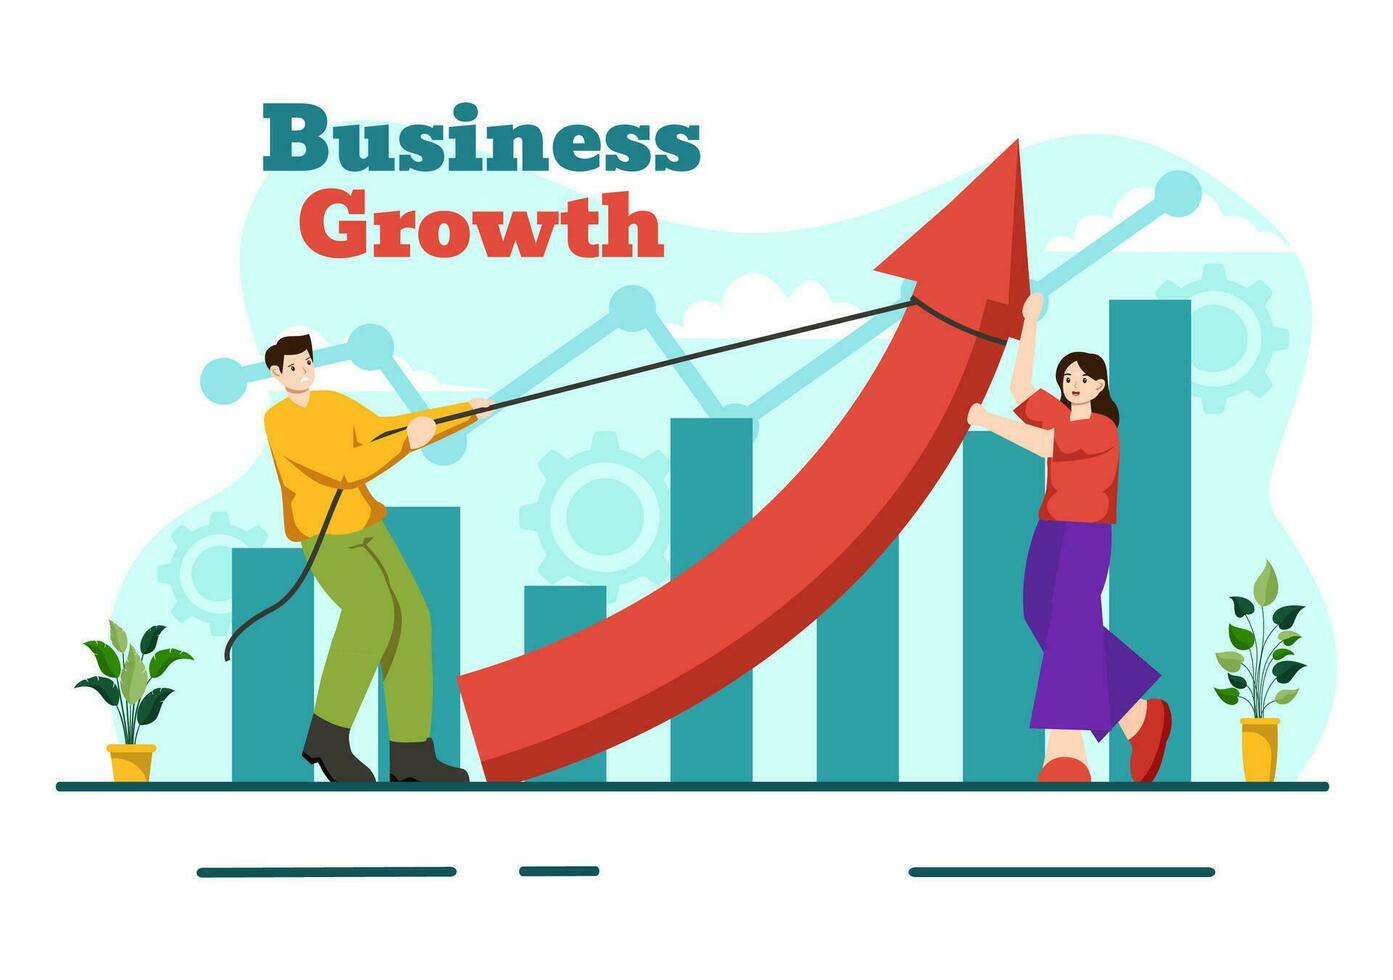 Business Growth Vector Illustration with Arrow Target Direction Up, Increase Profits, Boost and Idea Planning Money Increasing in Flat Background